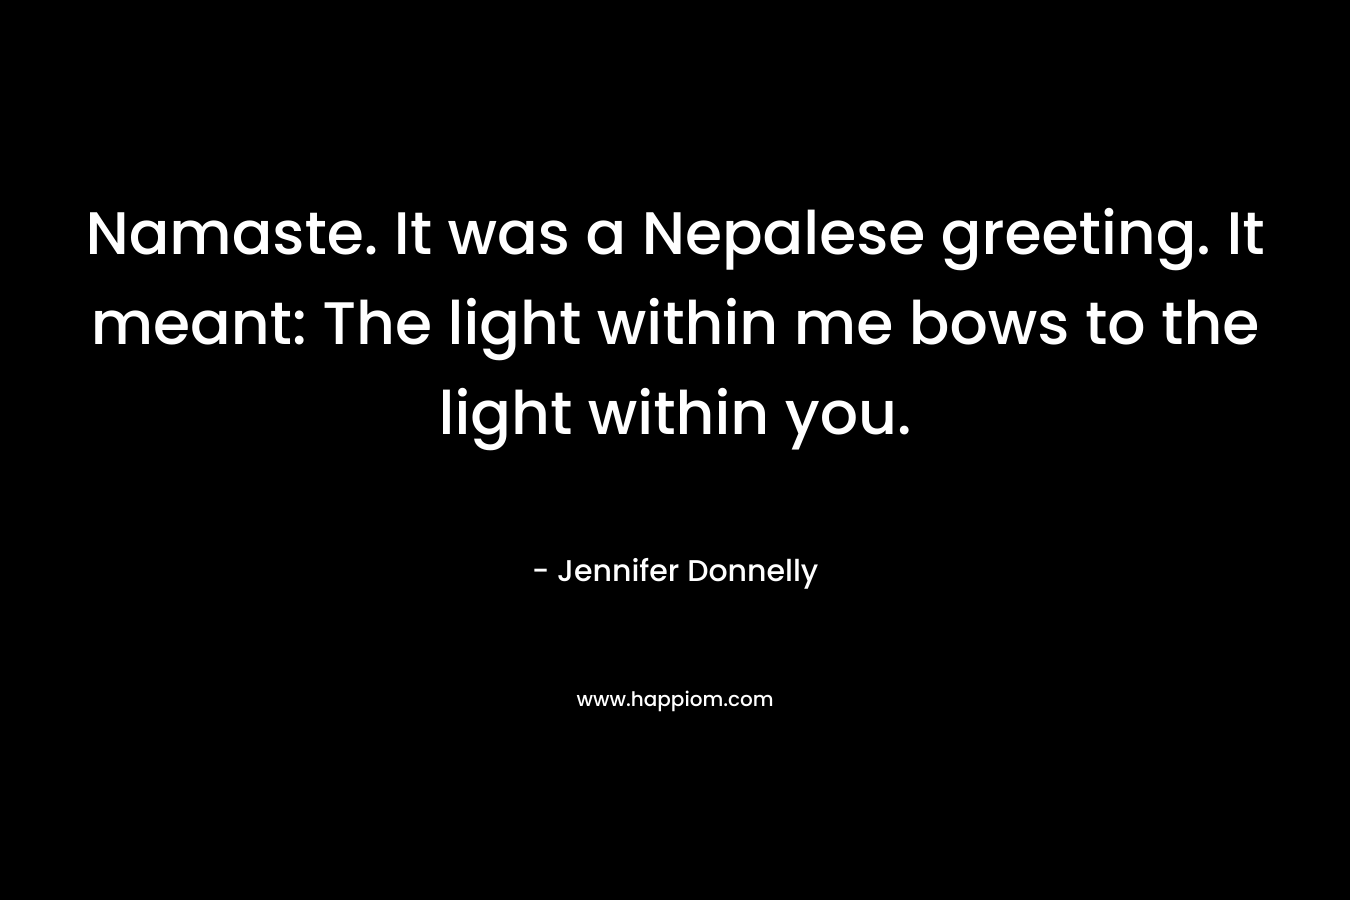 Namaste. It was a Nepalese greeting. It meant: The light within me bows to the light within you. – Jennifer Donnelly